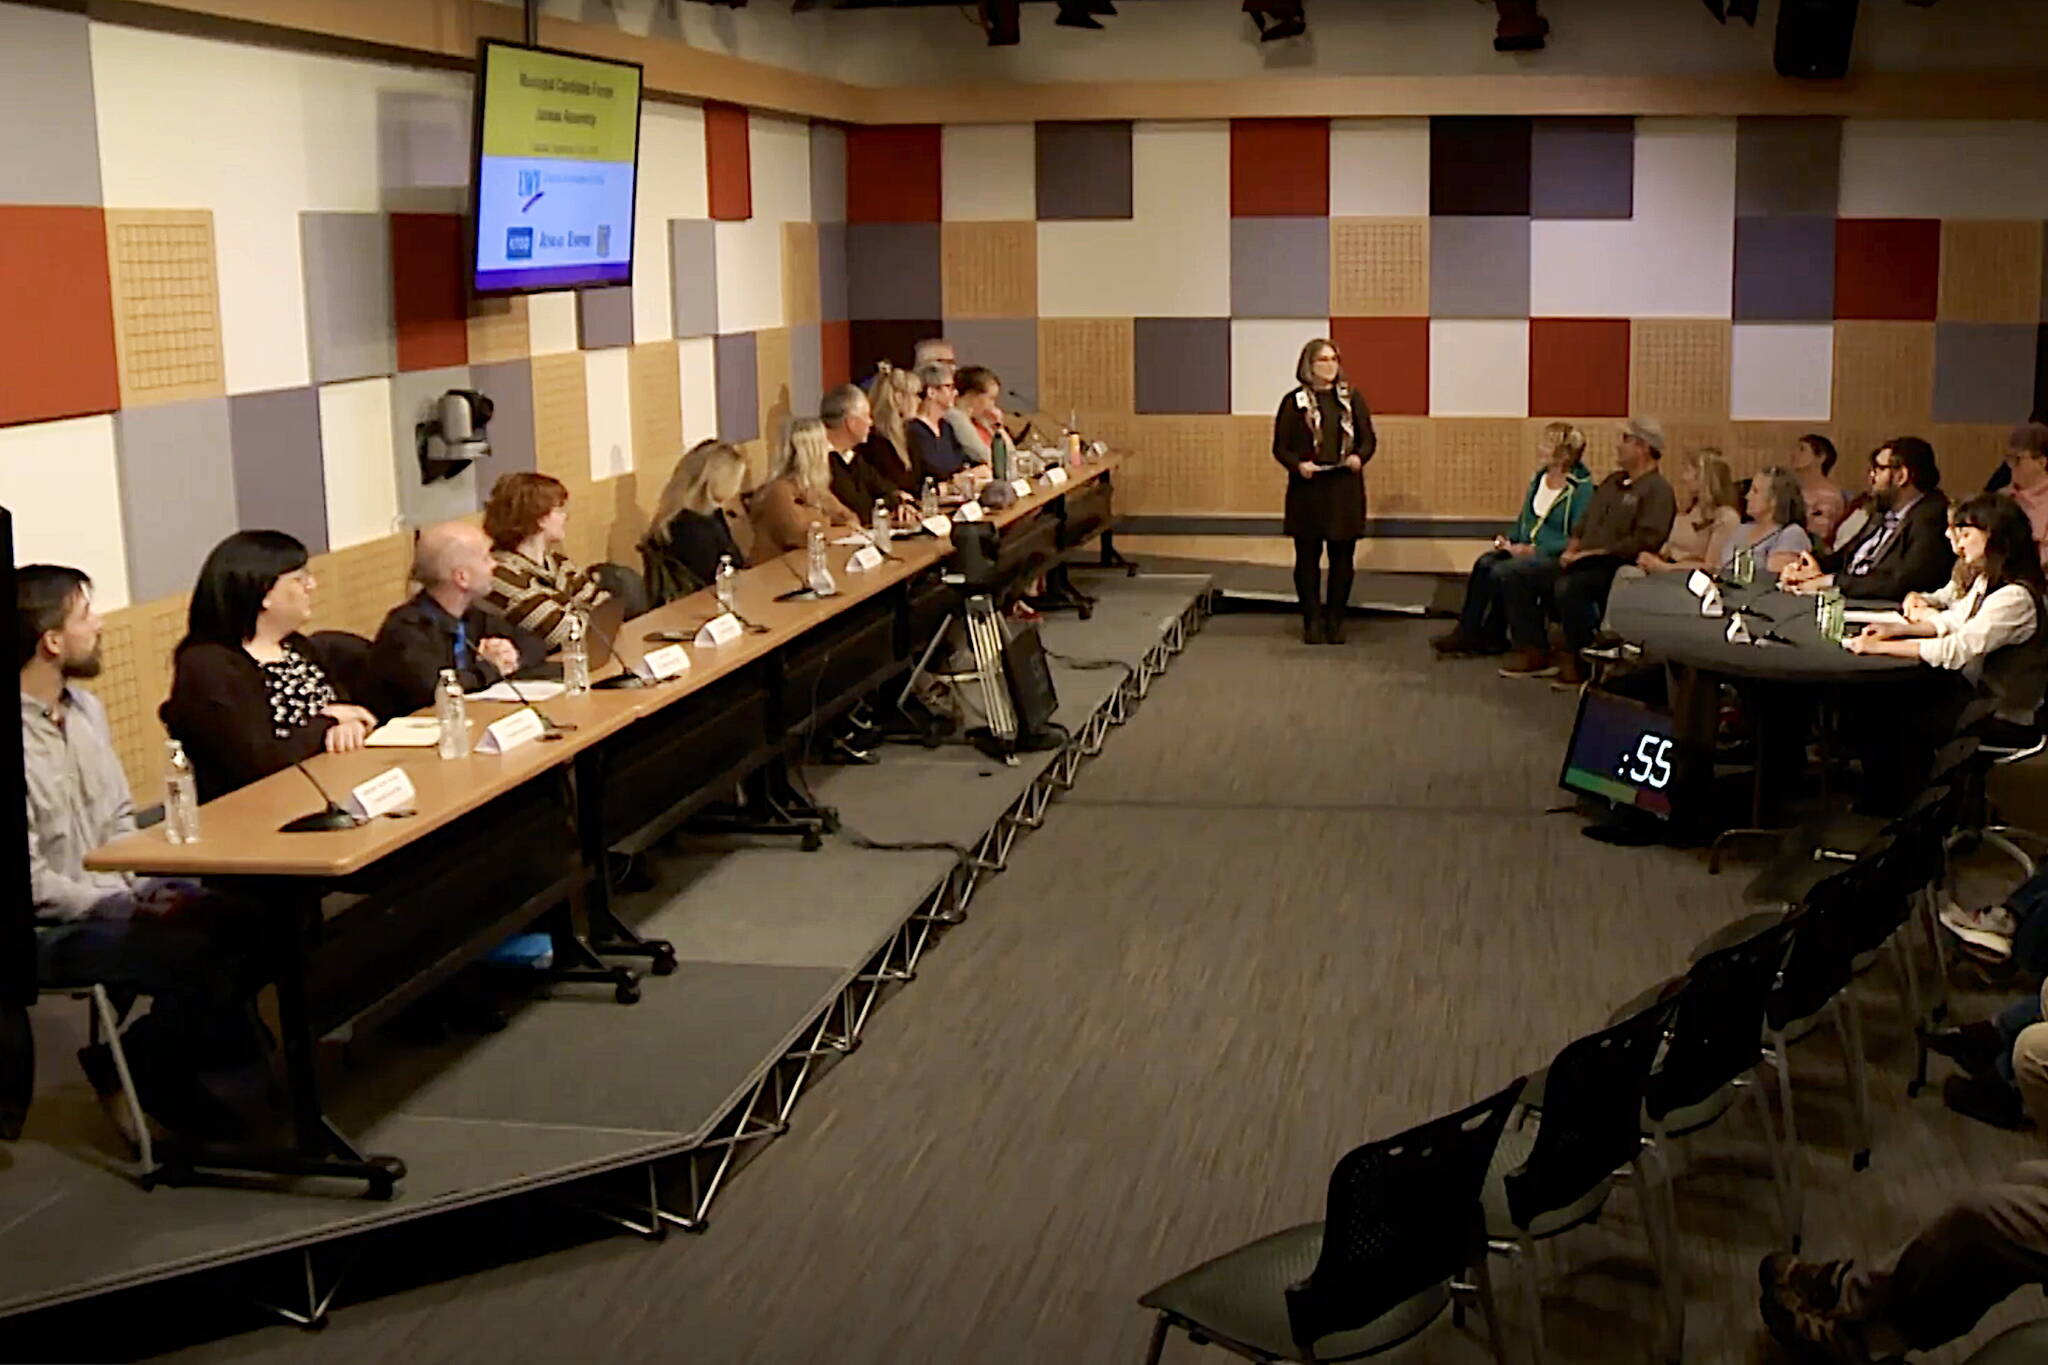 Juneau Assembly candidates prepare to answer questions during a 90-minute forum on Tuesday night at the KTOO studios. The forum was hosted by the Juneau League of Women Voters, and moderated by media representatives from KTOO, KINY and the Juneau Empire. (Screenshot from shared video of forum)